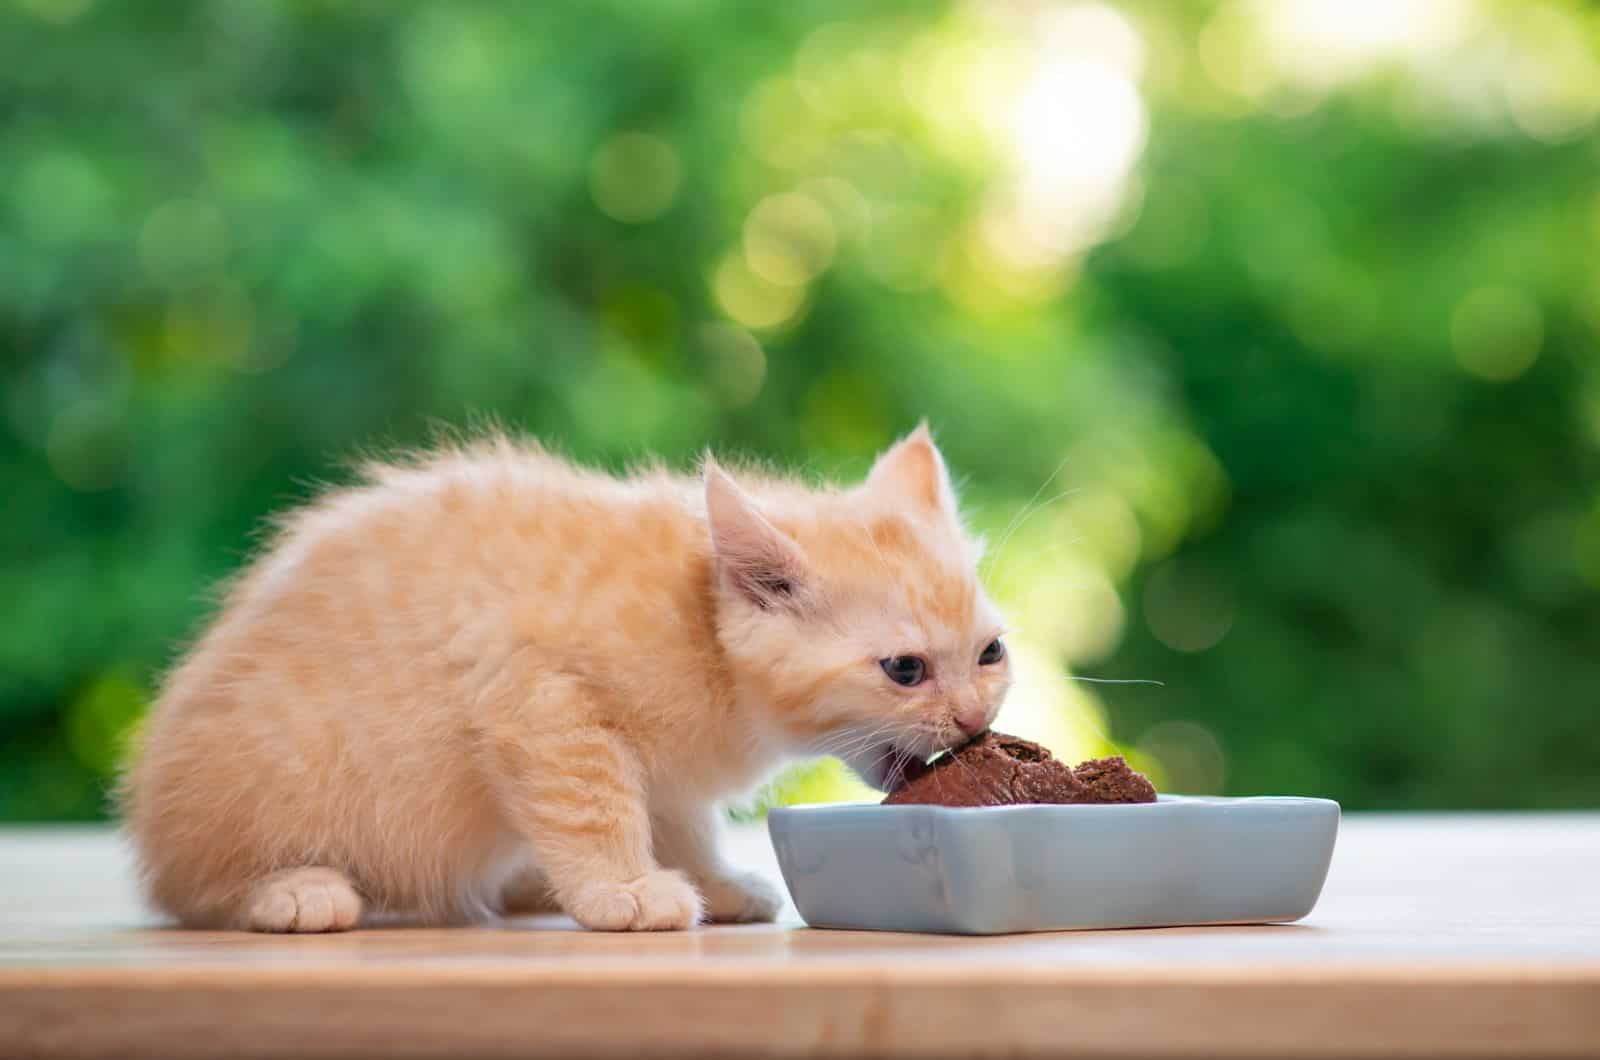 small hungry orange kitten eating best food for kittens from a grey bowl with green background